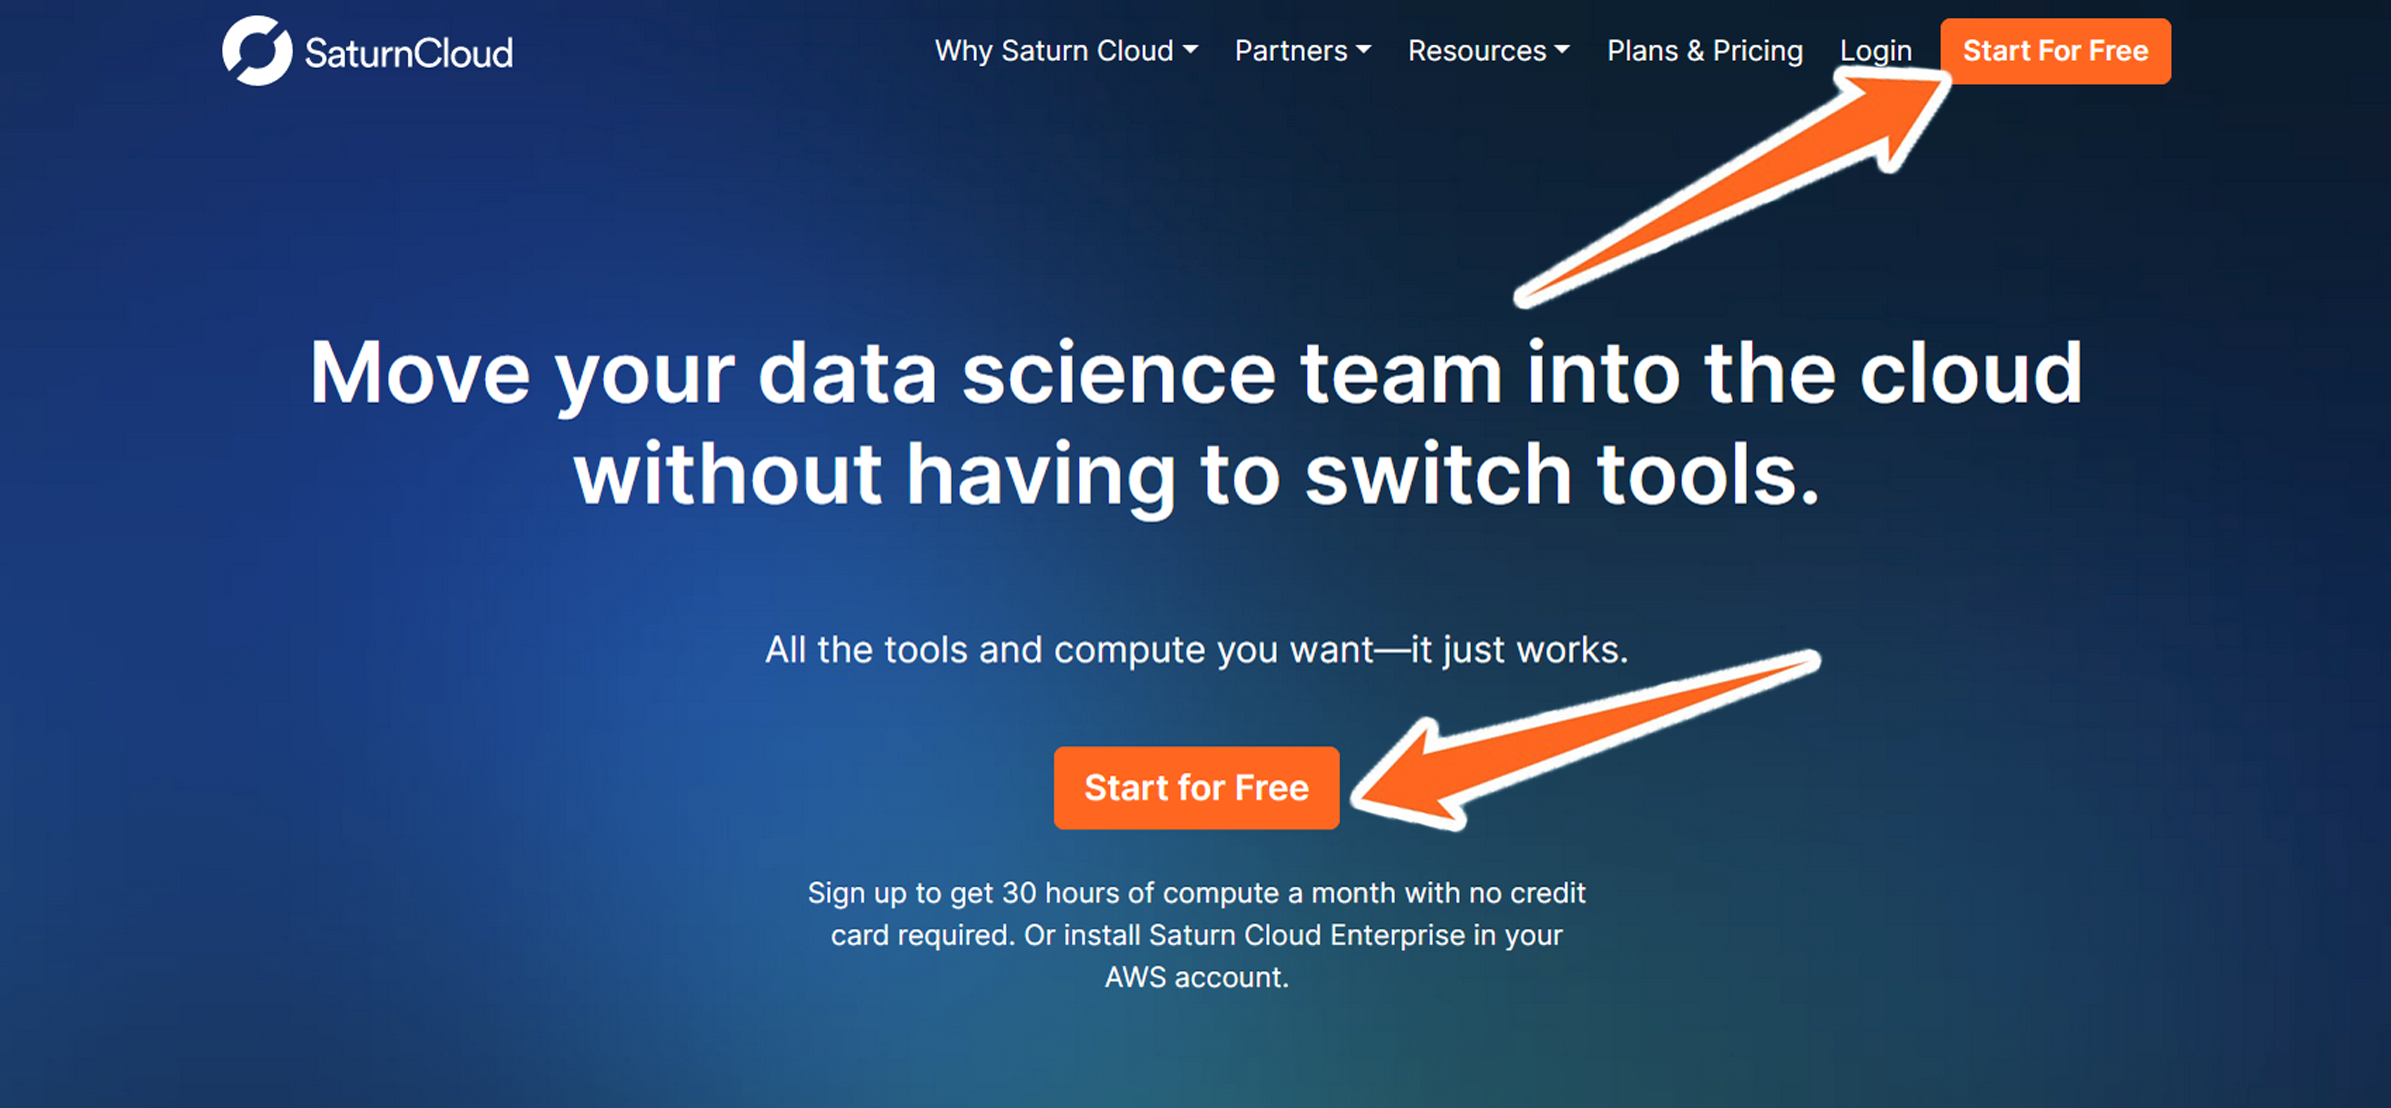 Saturn Cloud homepage with arrows pointing to &ldquo;Start for Free&rdquo;